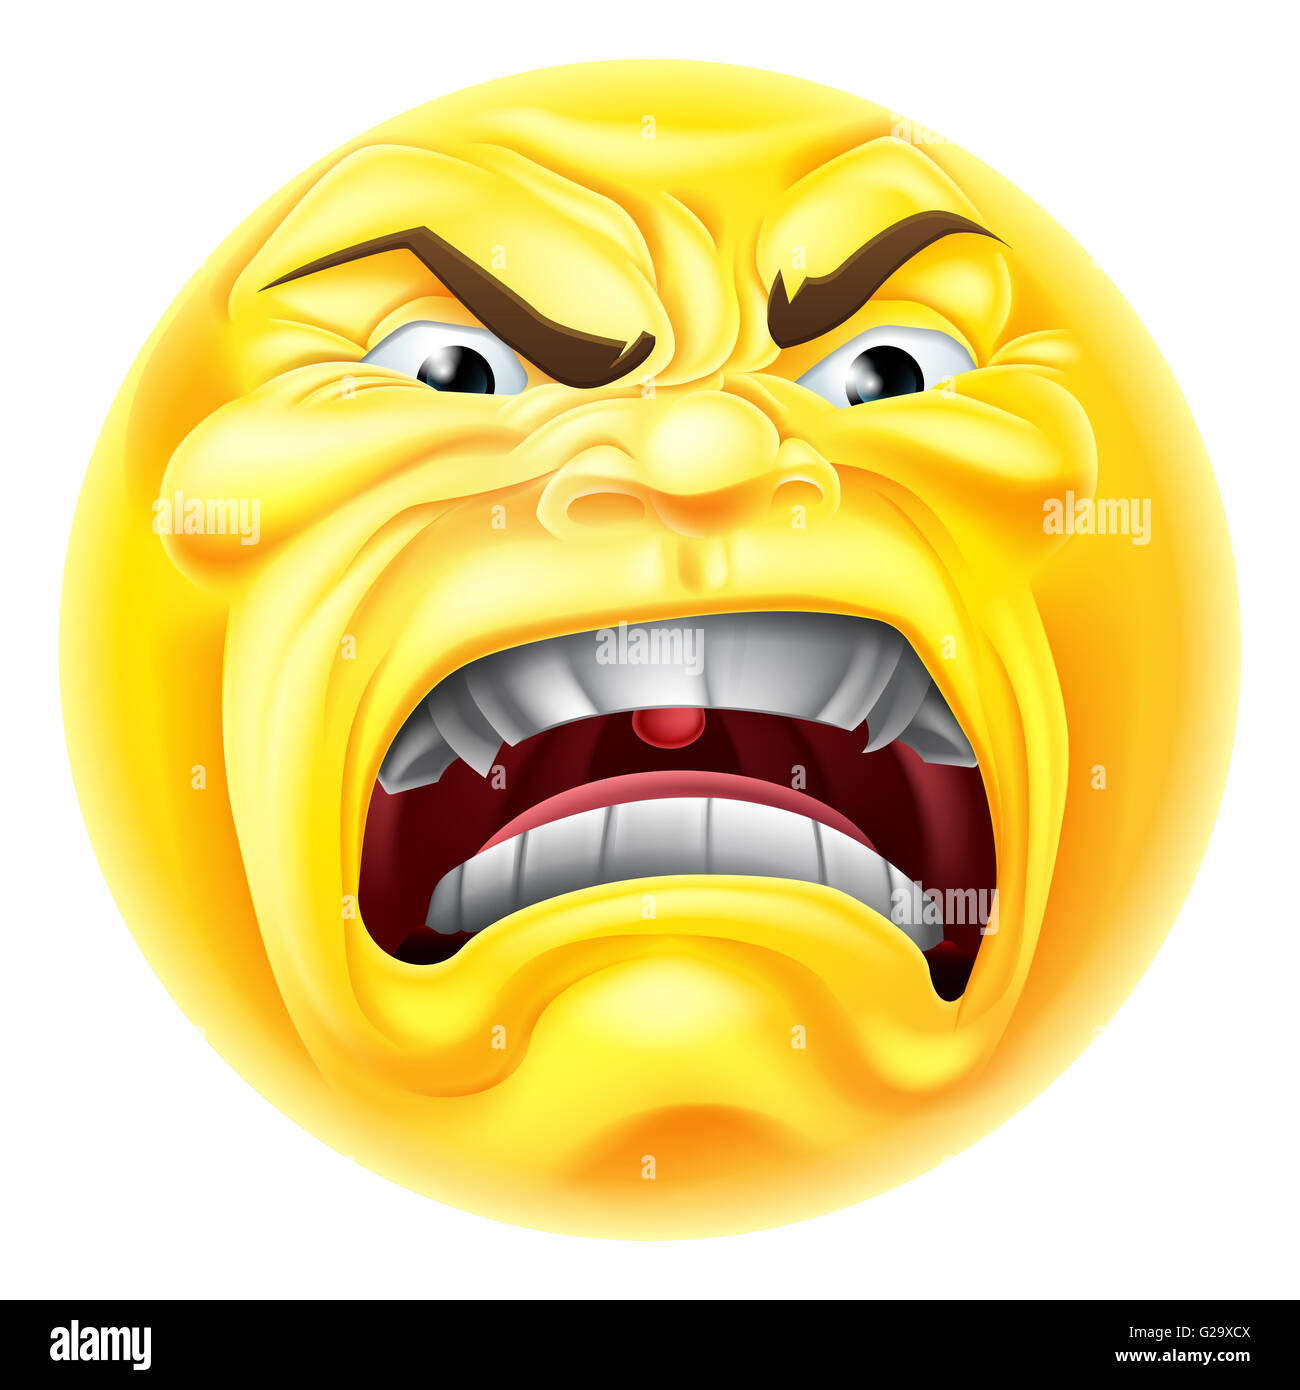 A cartoon emoji emoticon icon looking very angry or furious Stock Photo